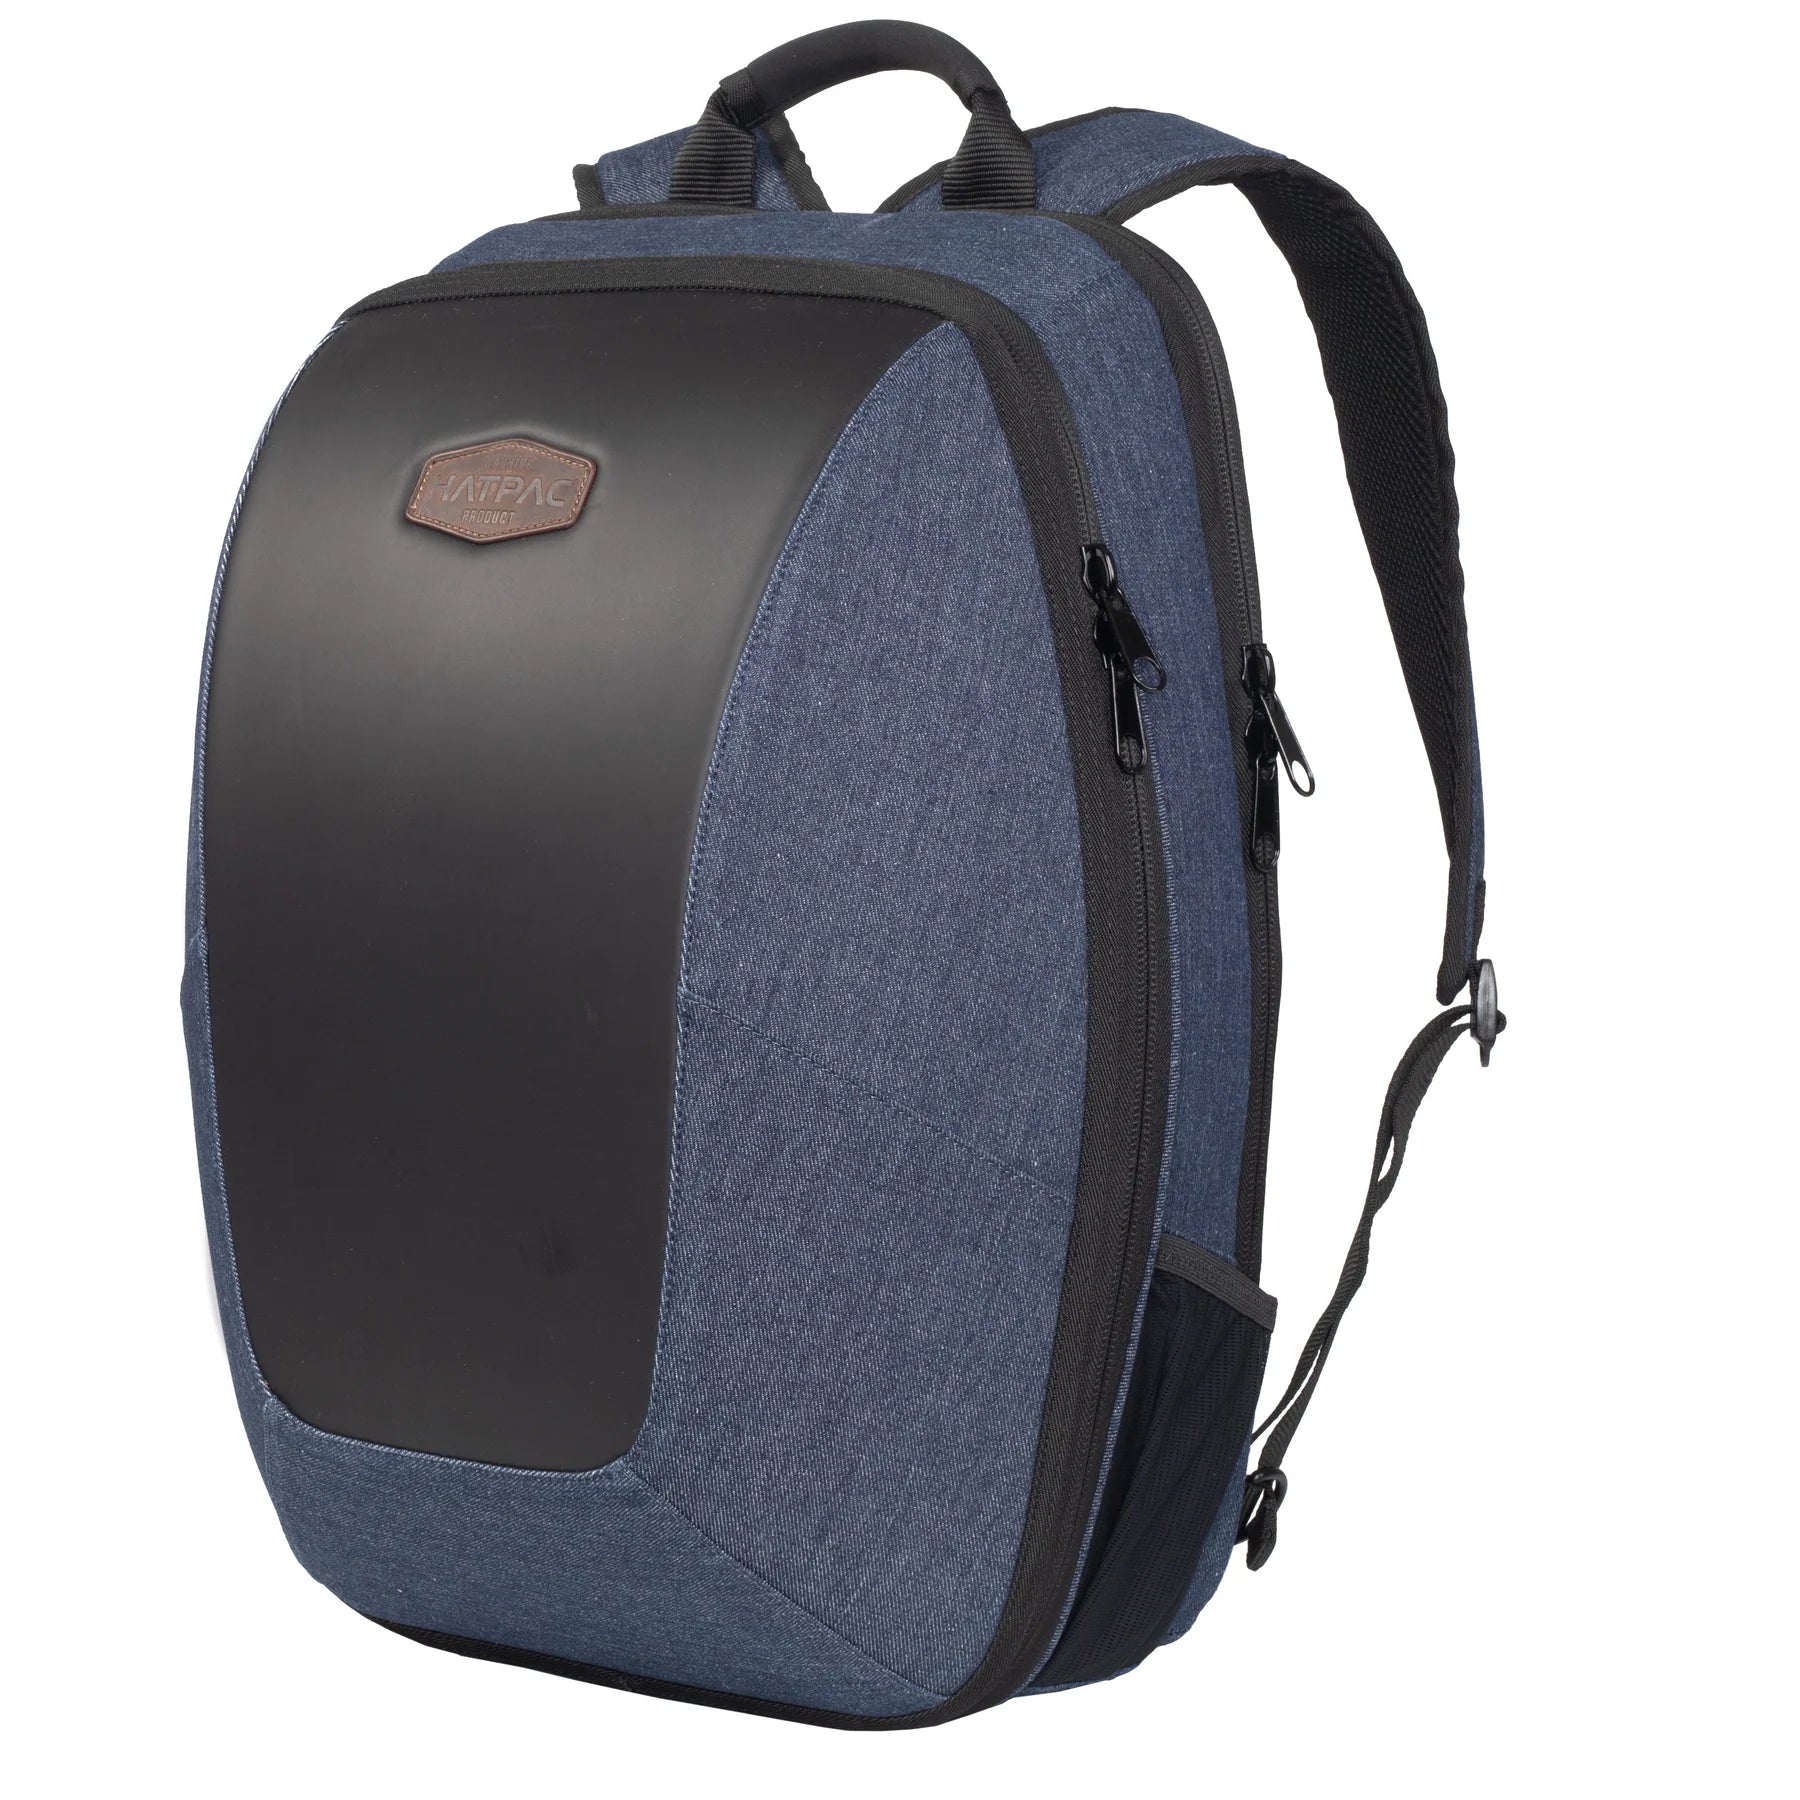 Hatpac Resistol Hat Backpack-Hatpac-HatCo-Lucky J Boots & More, Women's, Men's, & Kids Western Store Located in Carthage, MO